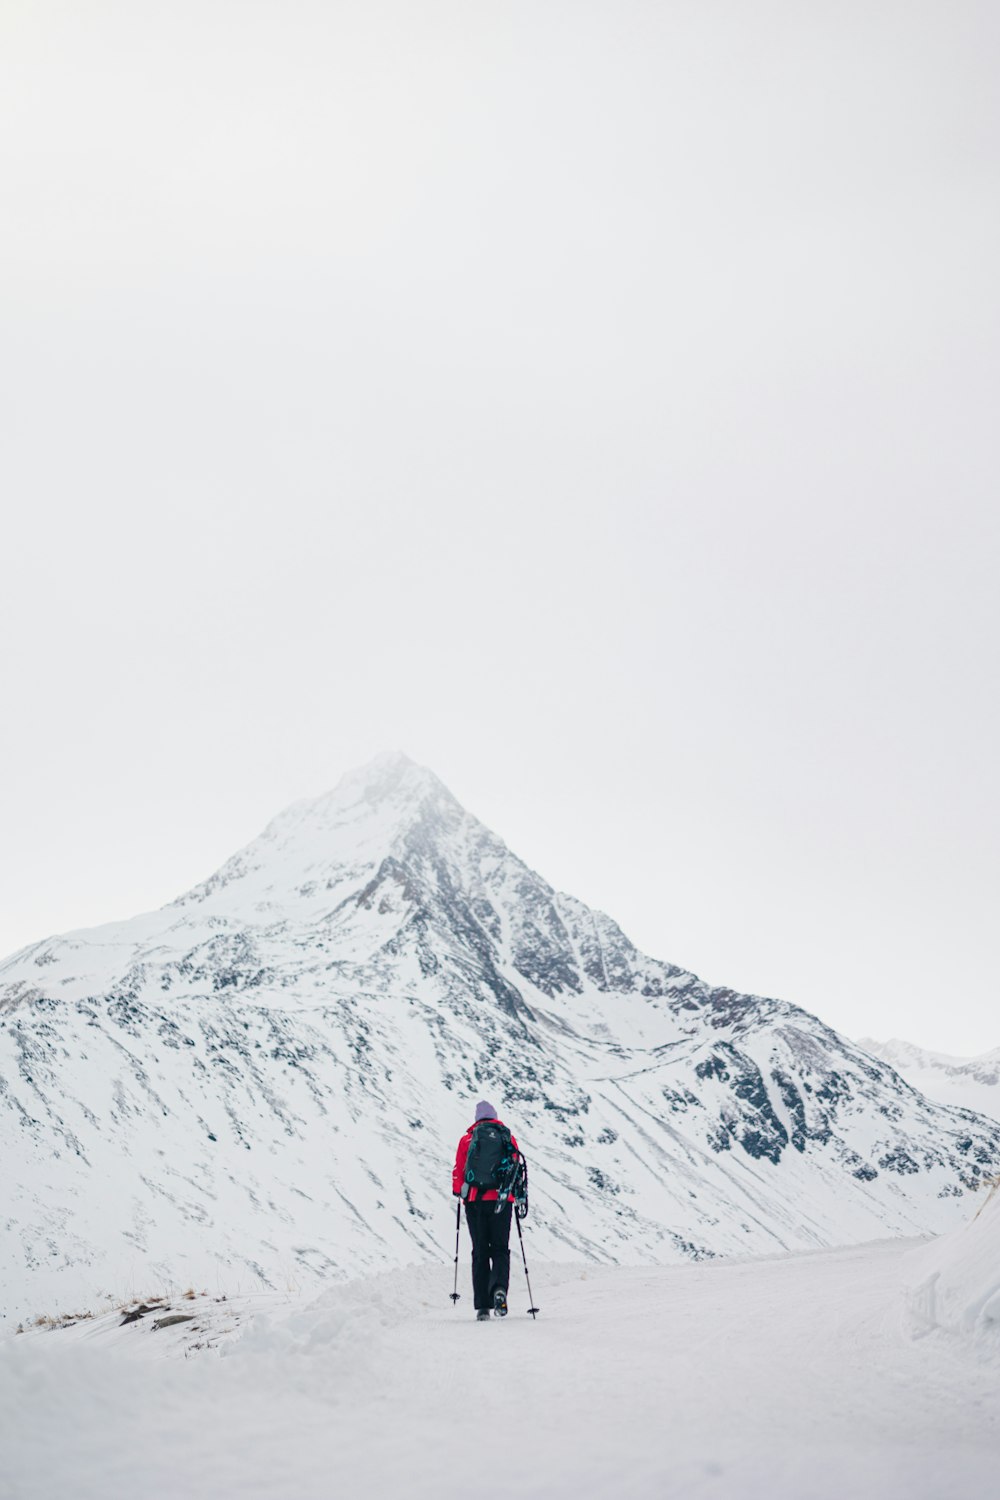 a person on skis in the snow near a mountain